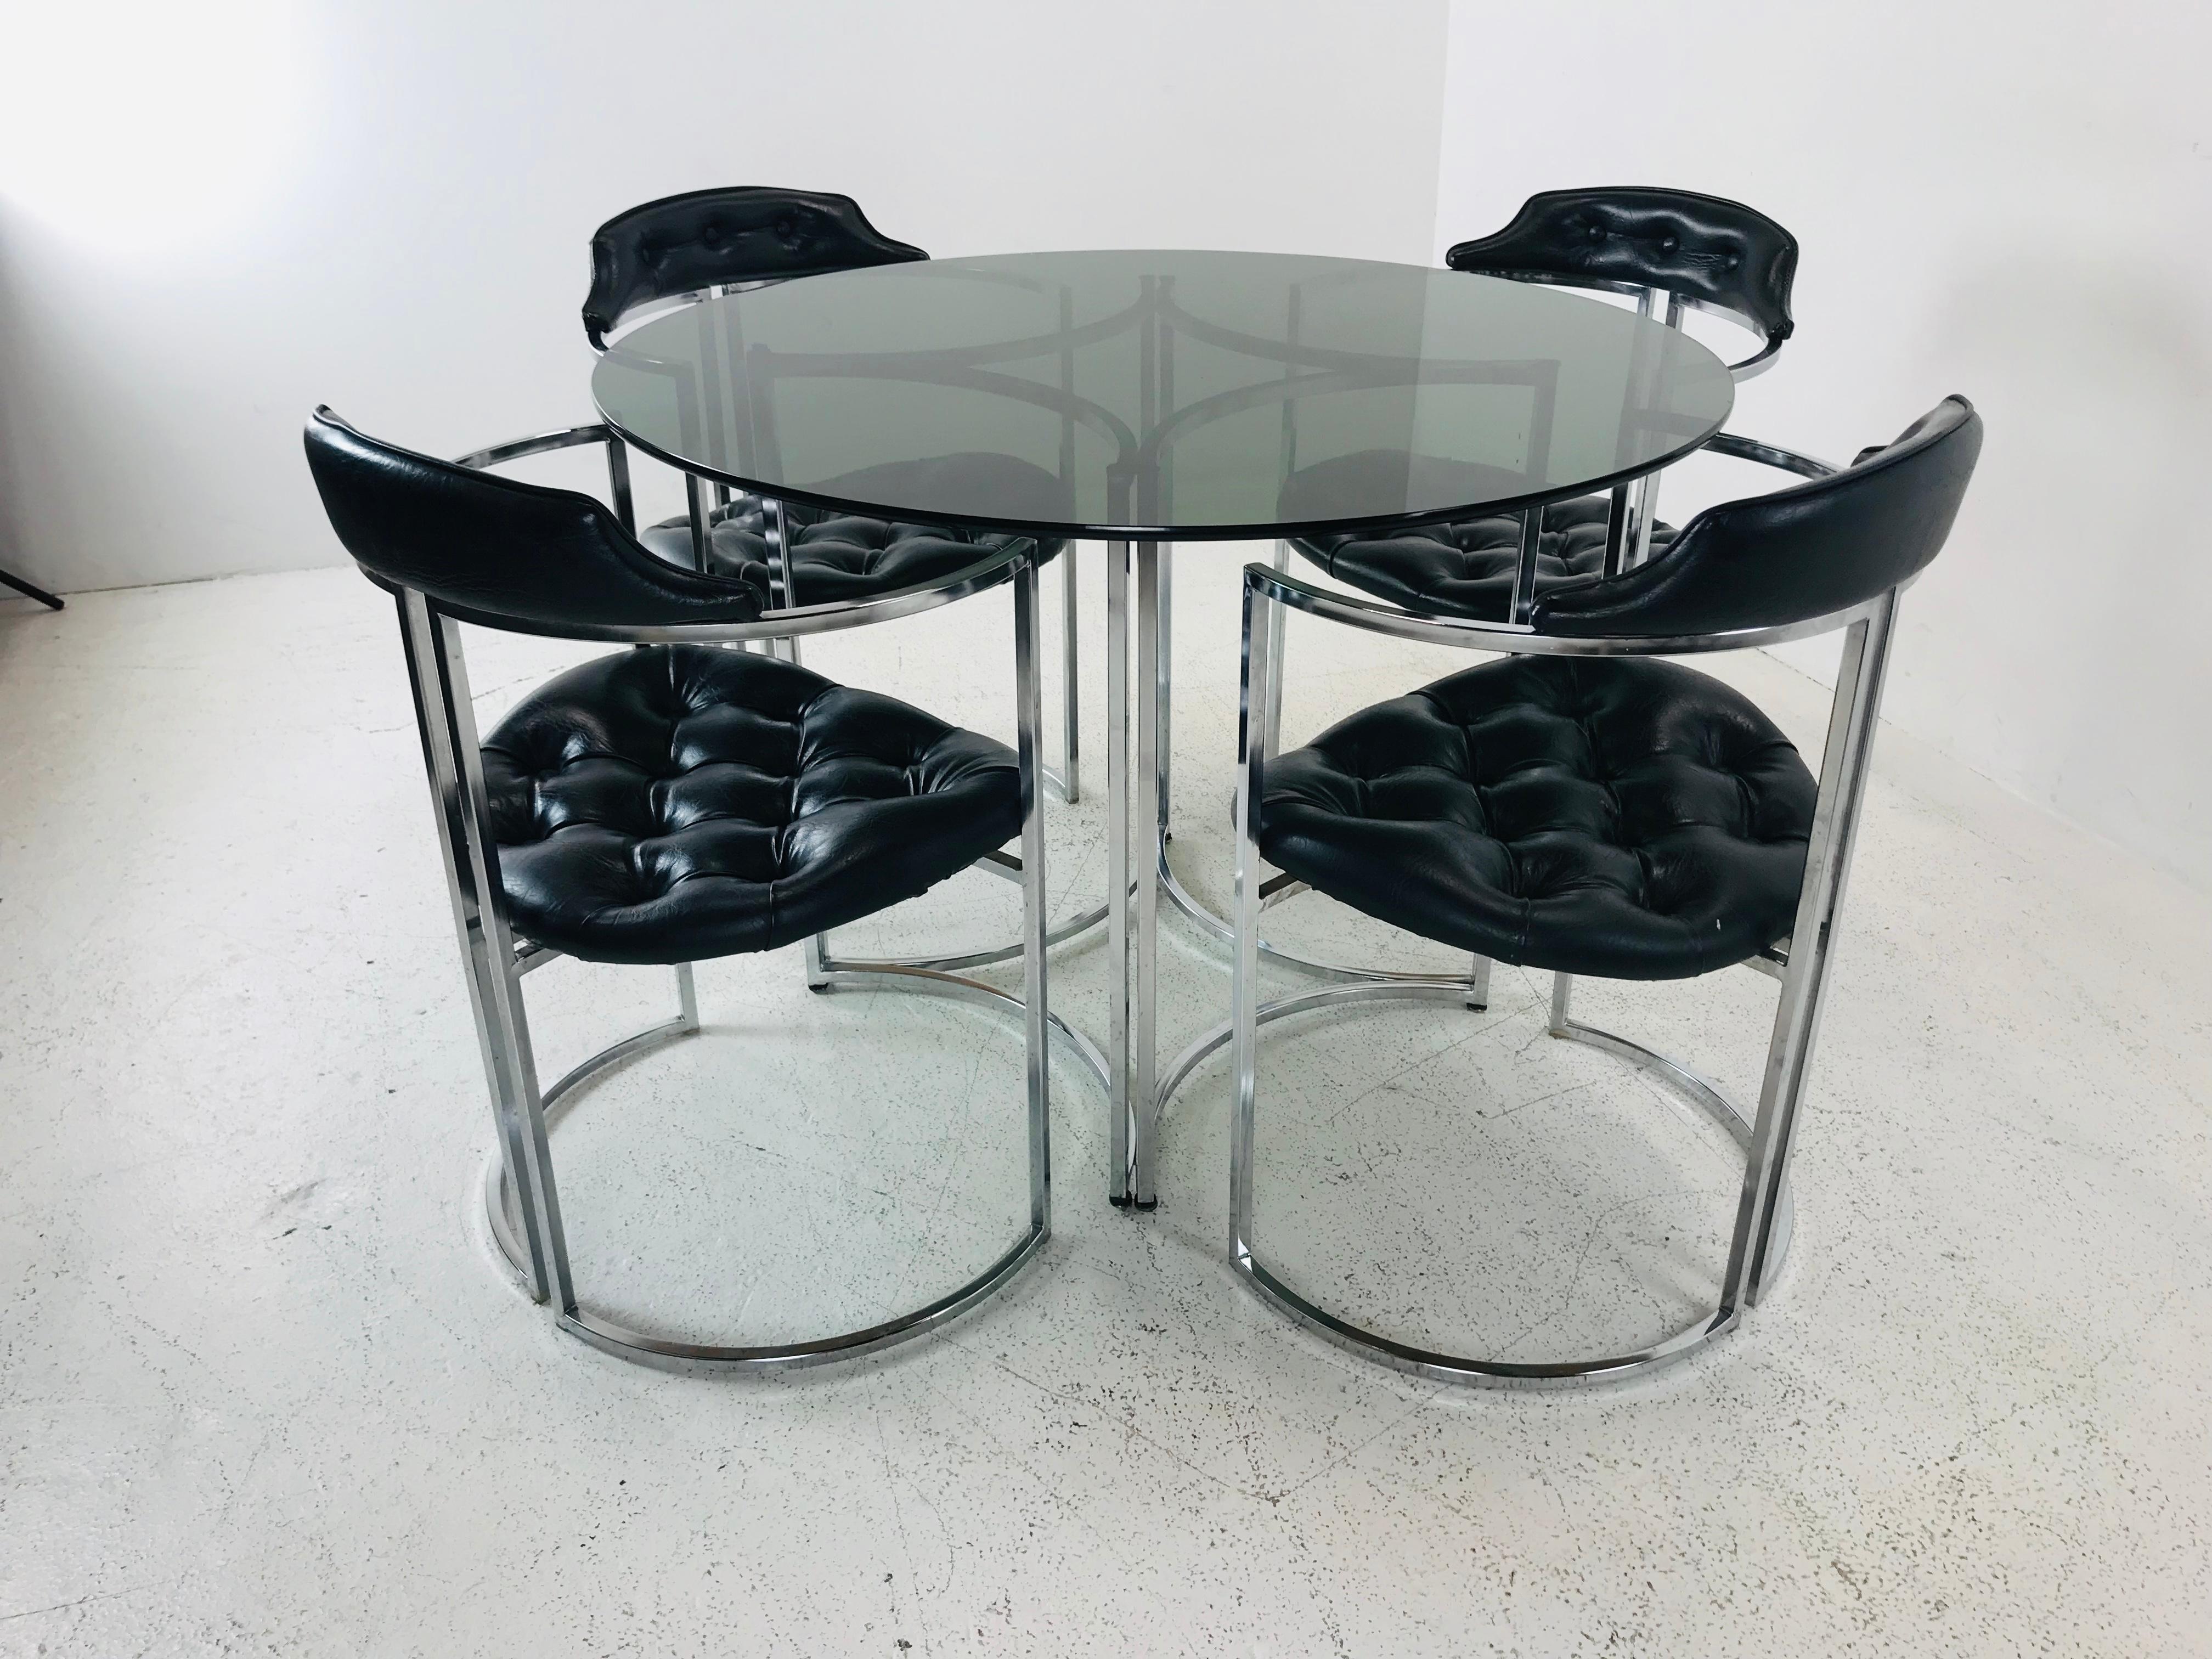 Four Daystrom chairs with smoked glass table top with chrome base.
Table is 42 D x 29 H
Chairs are 22 W x 27 D x 37 H SH 20